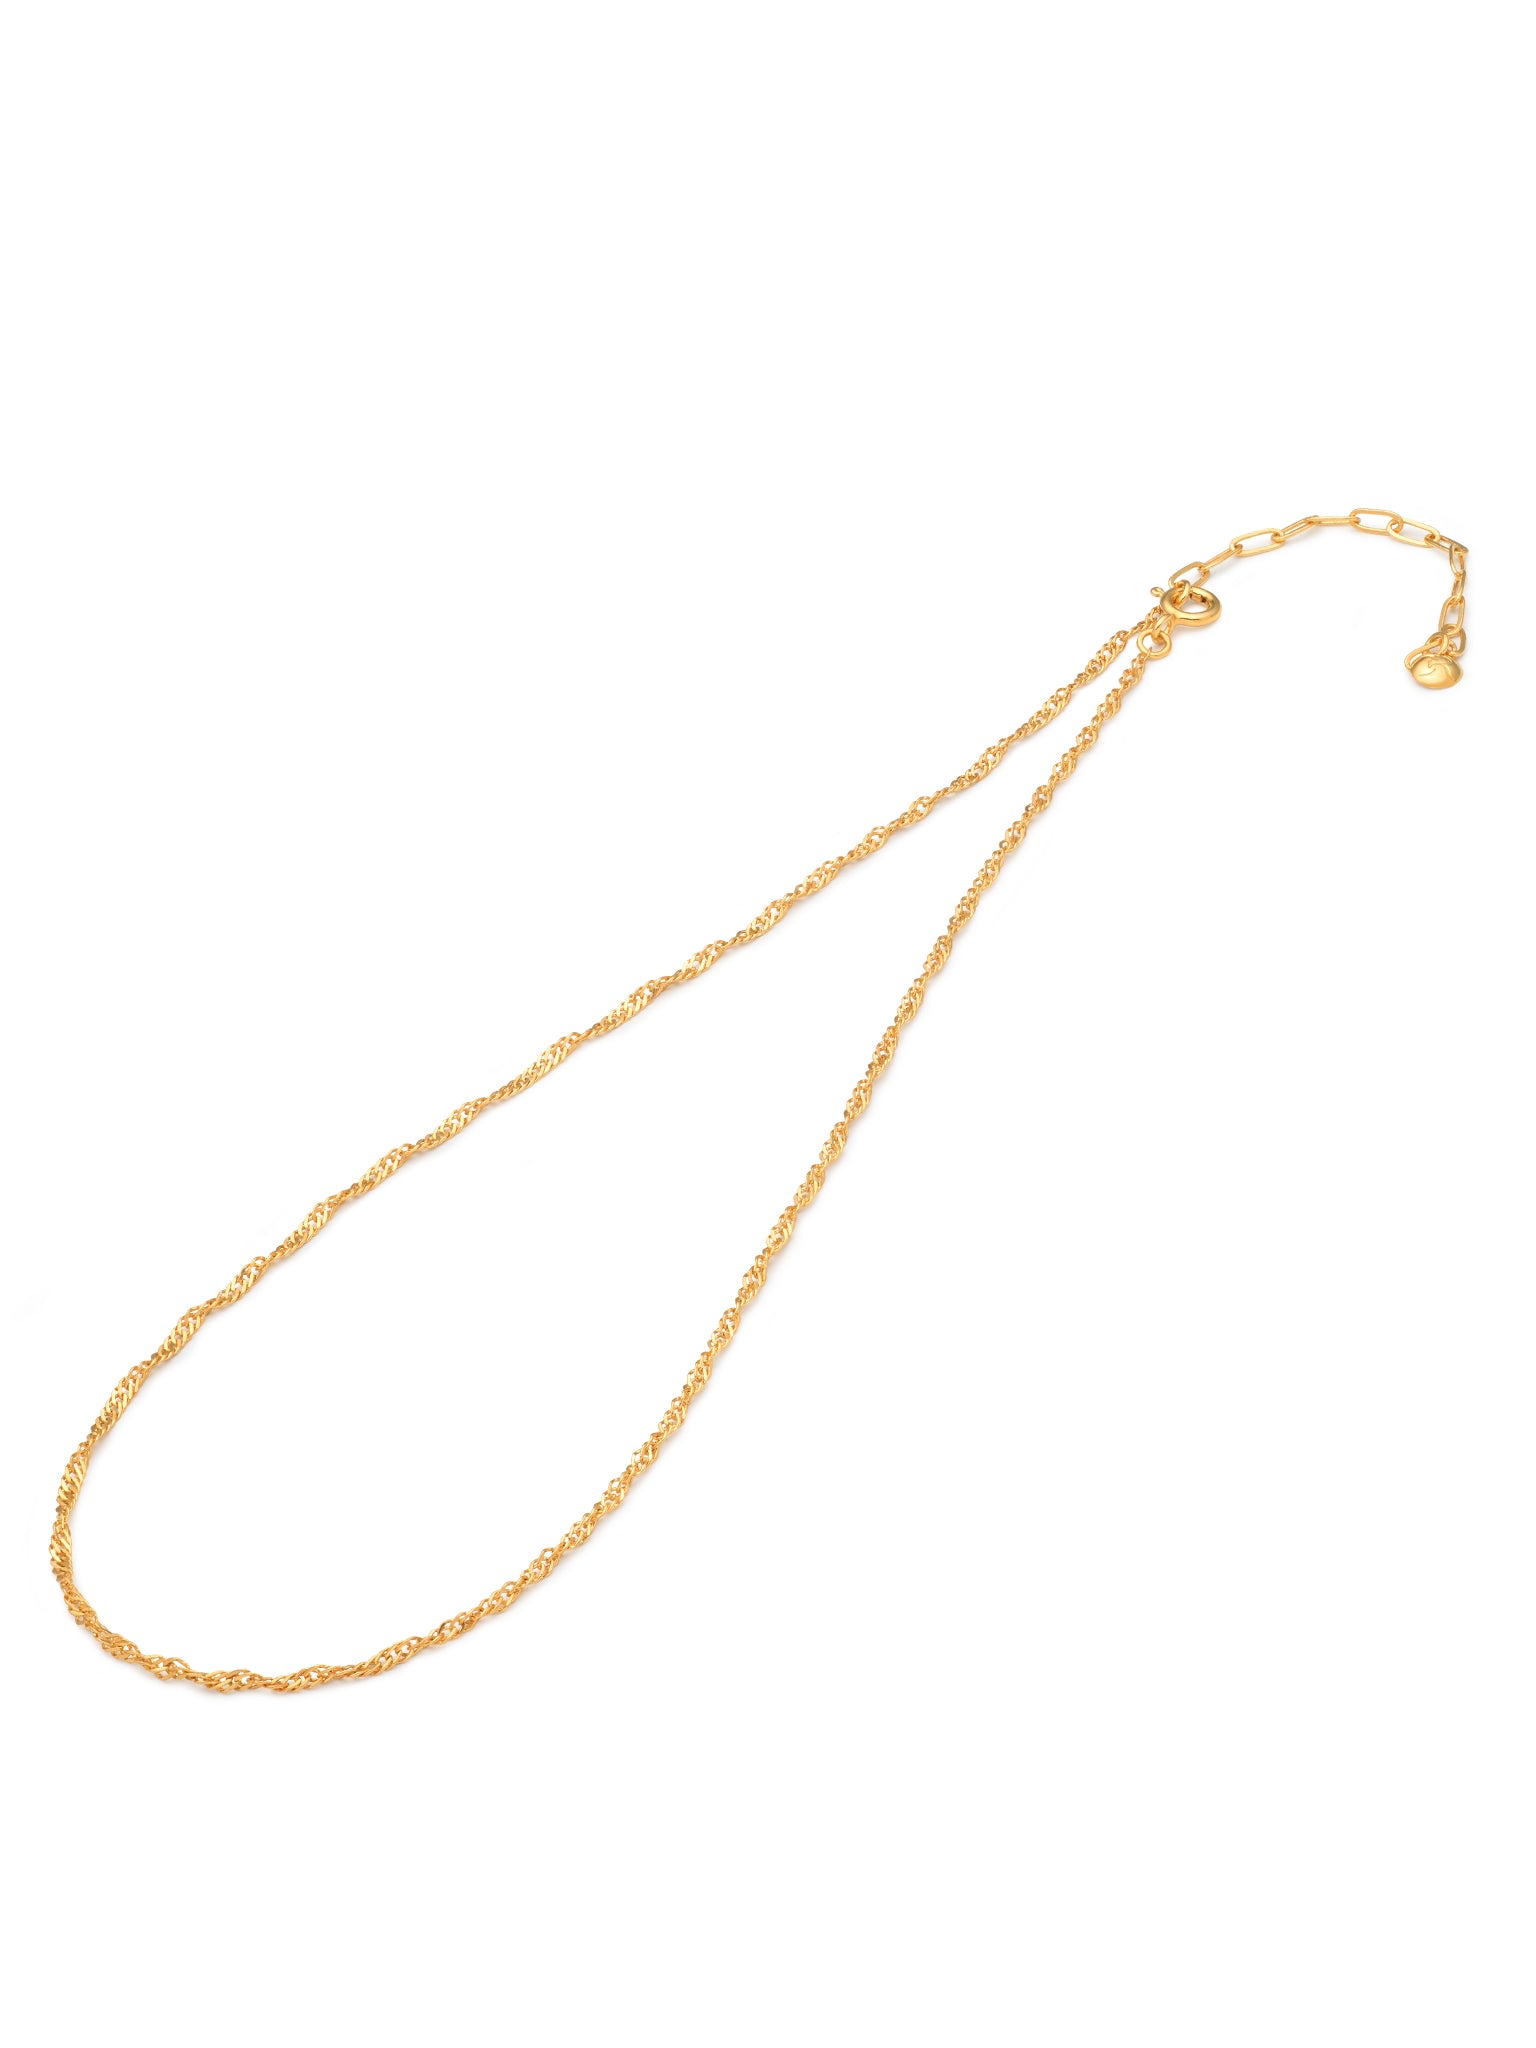 Eva Remenyi Women's Gold Twisted Chain Necklace